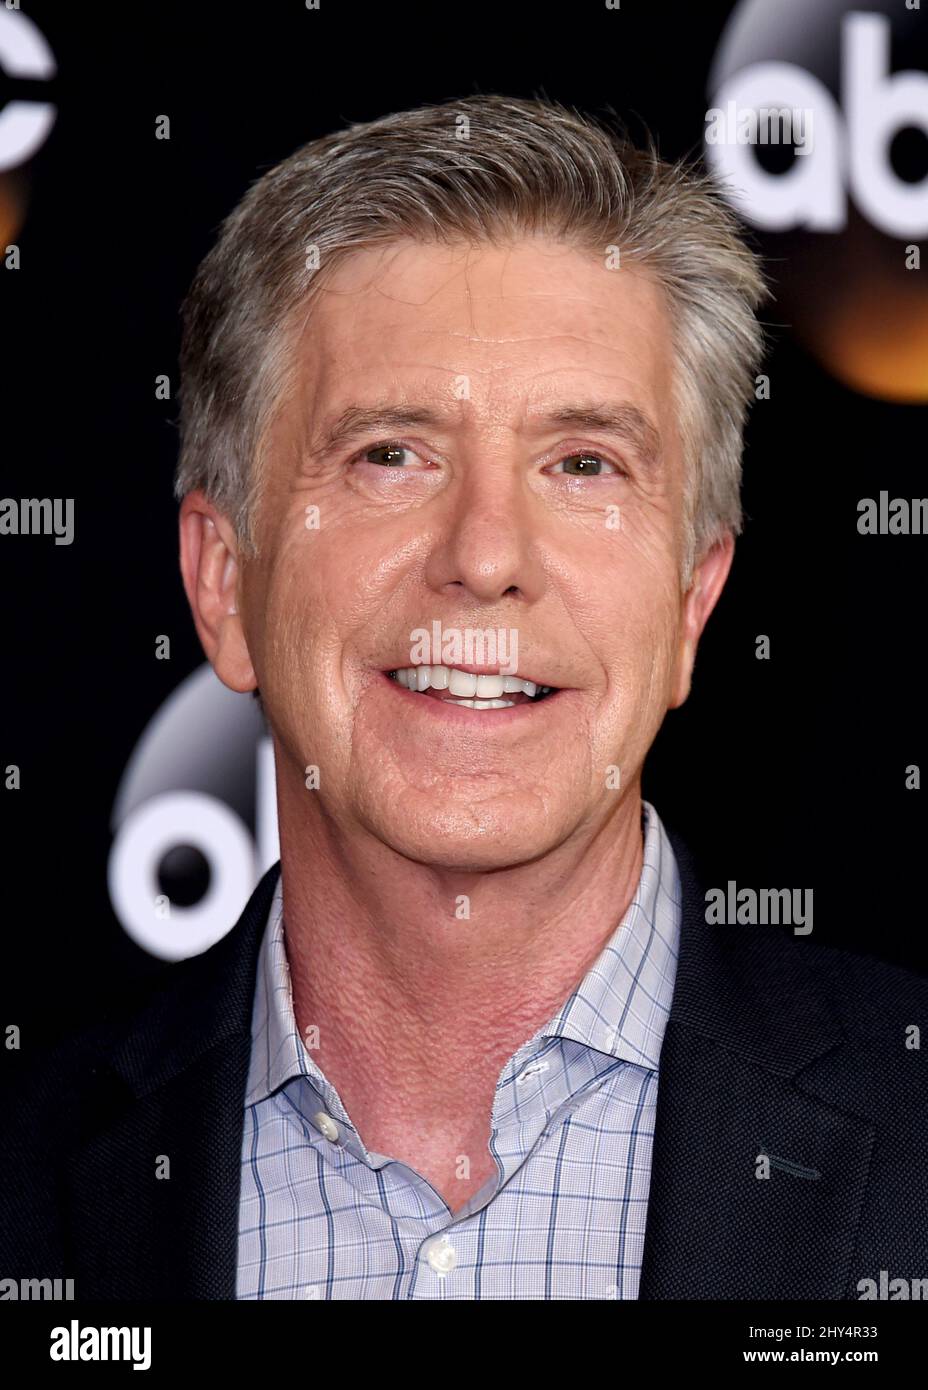 Tom Bergeron attending the ABC Summer Press Tour in Beverly Hills, California. Stock Photo